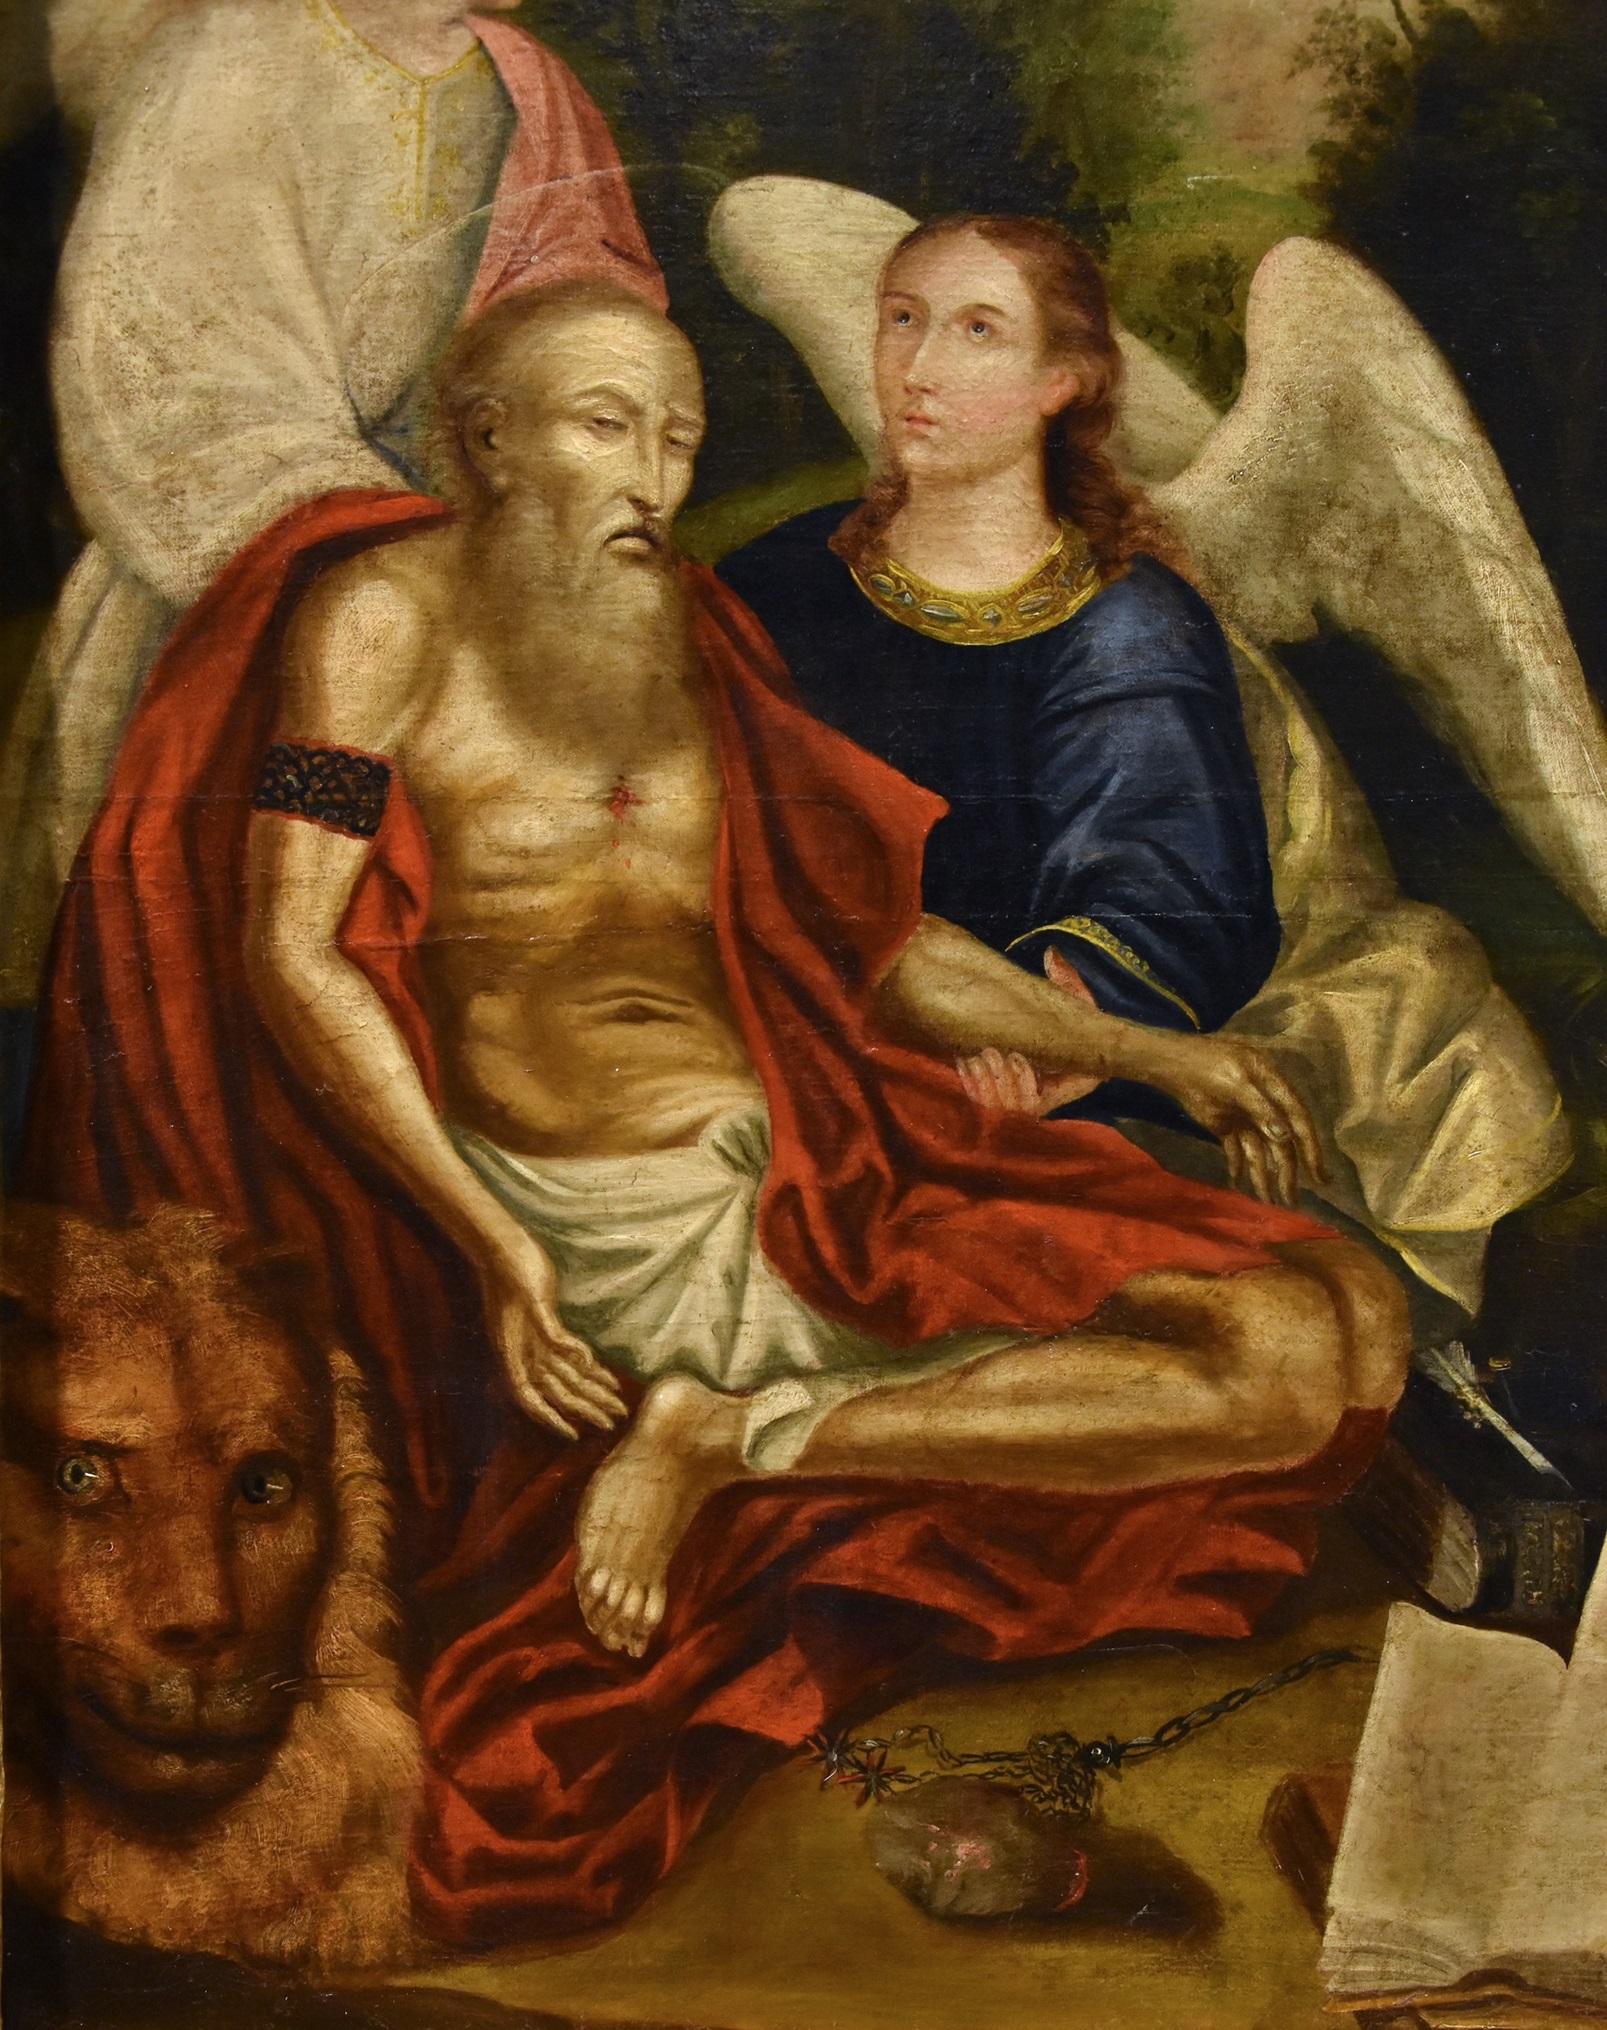 Saint Jerome Angels 17th Century Venetian School Paint Oil on canvas Old master - Painting by Venetian Painter